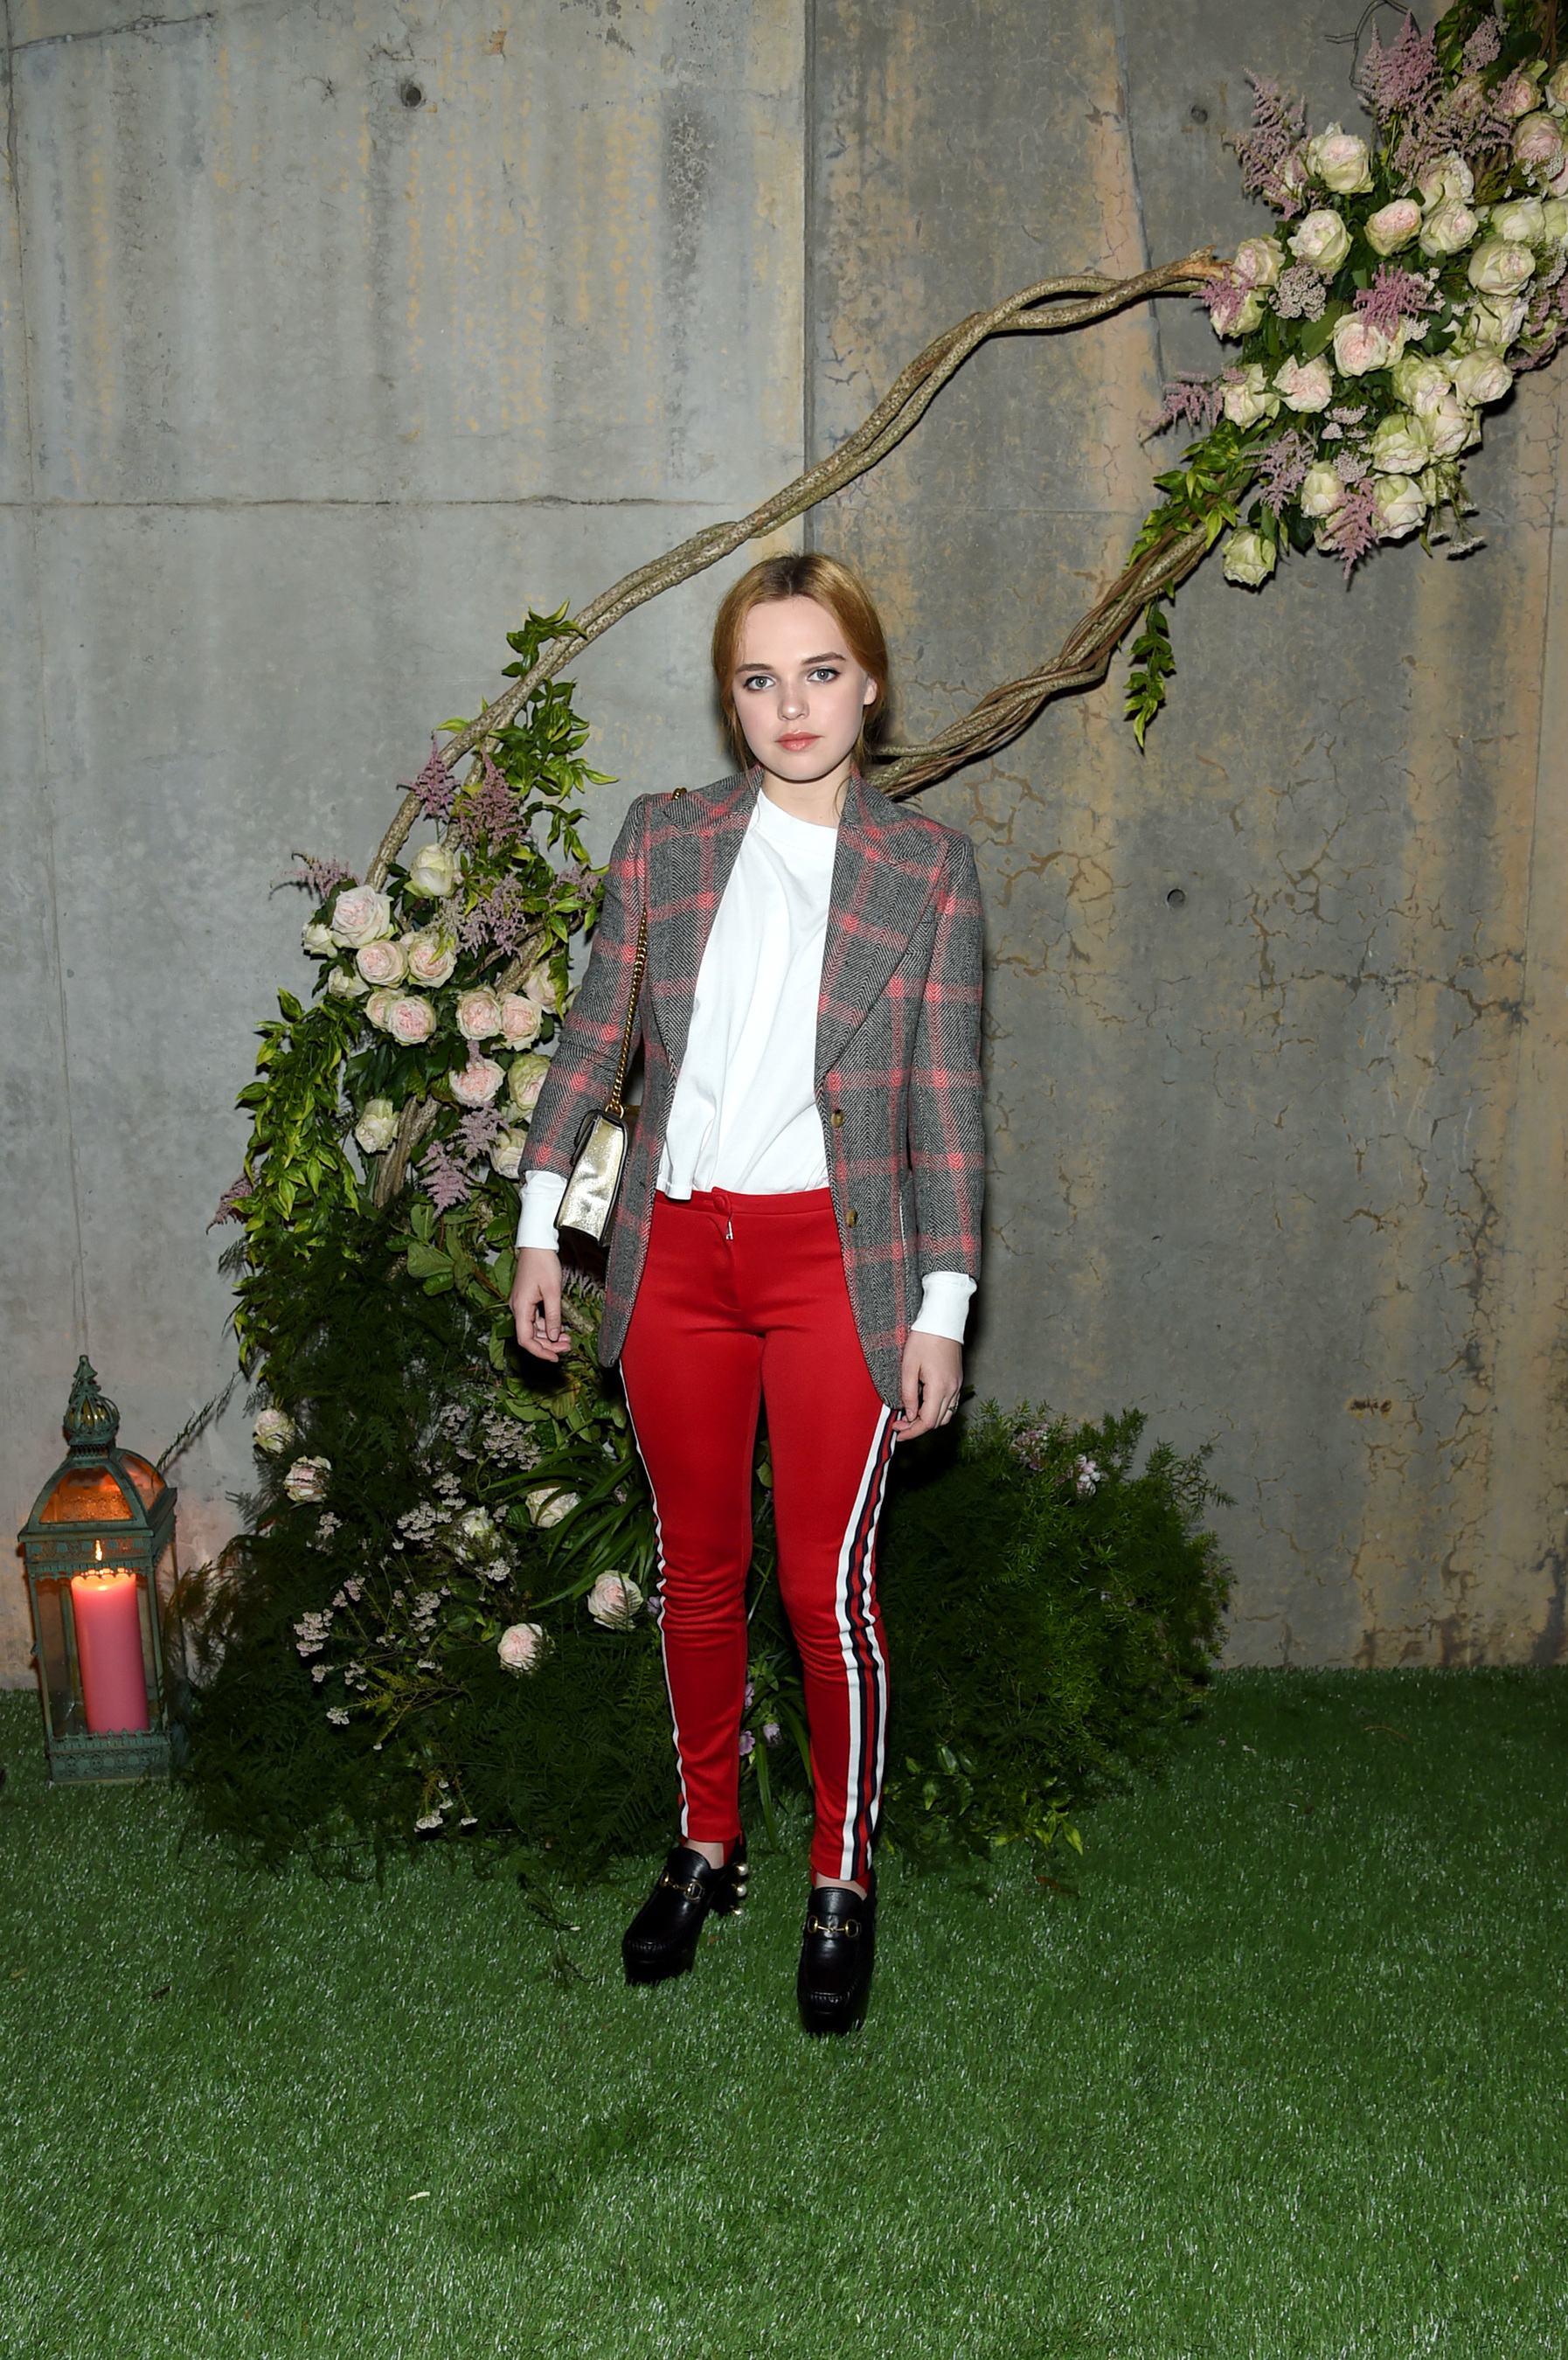 NEW YORK, NY - MAY 02: Odessa Young attends the Gucci Bloom Fragrance Launch at MoMA PS.1 on May 2, 2017 in New York City. (Photo by Jamie McCarthy/Getty Images for Gucci)